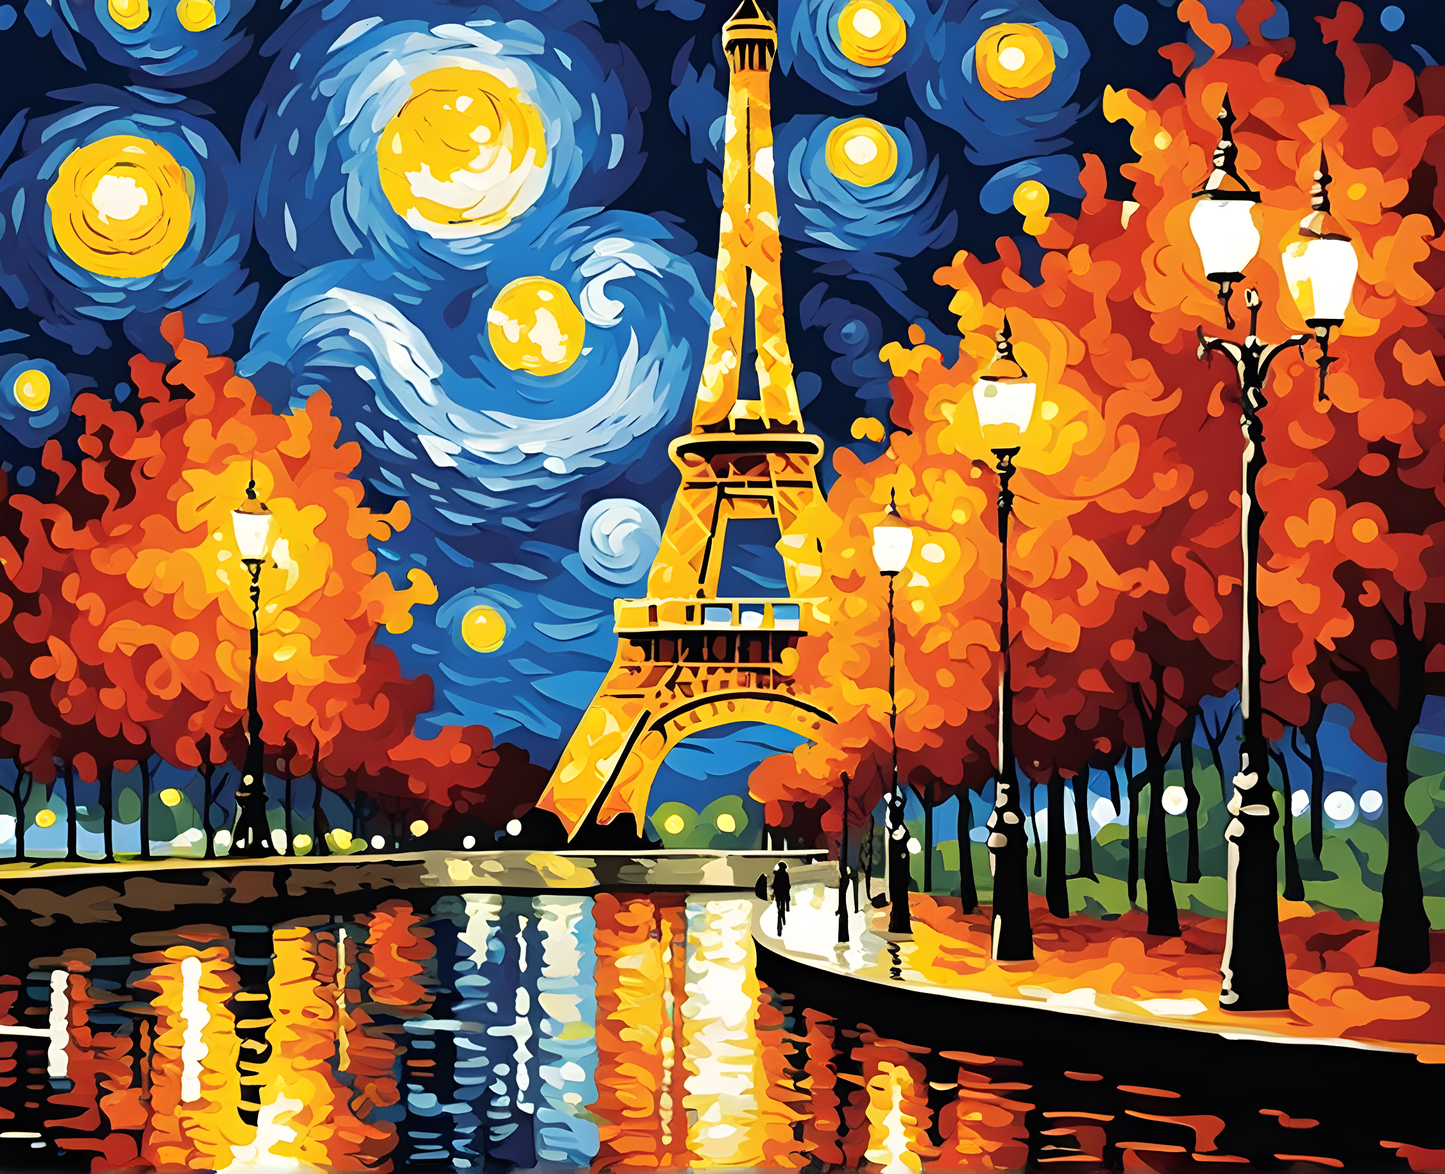 Starry Night Collection OD (5) - Eiffel Tower - Van-Go Paint-By-Number Kit